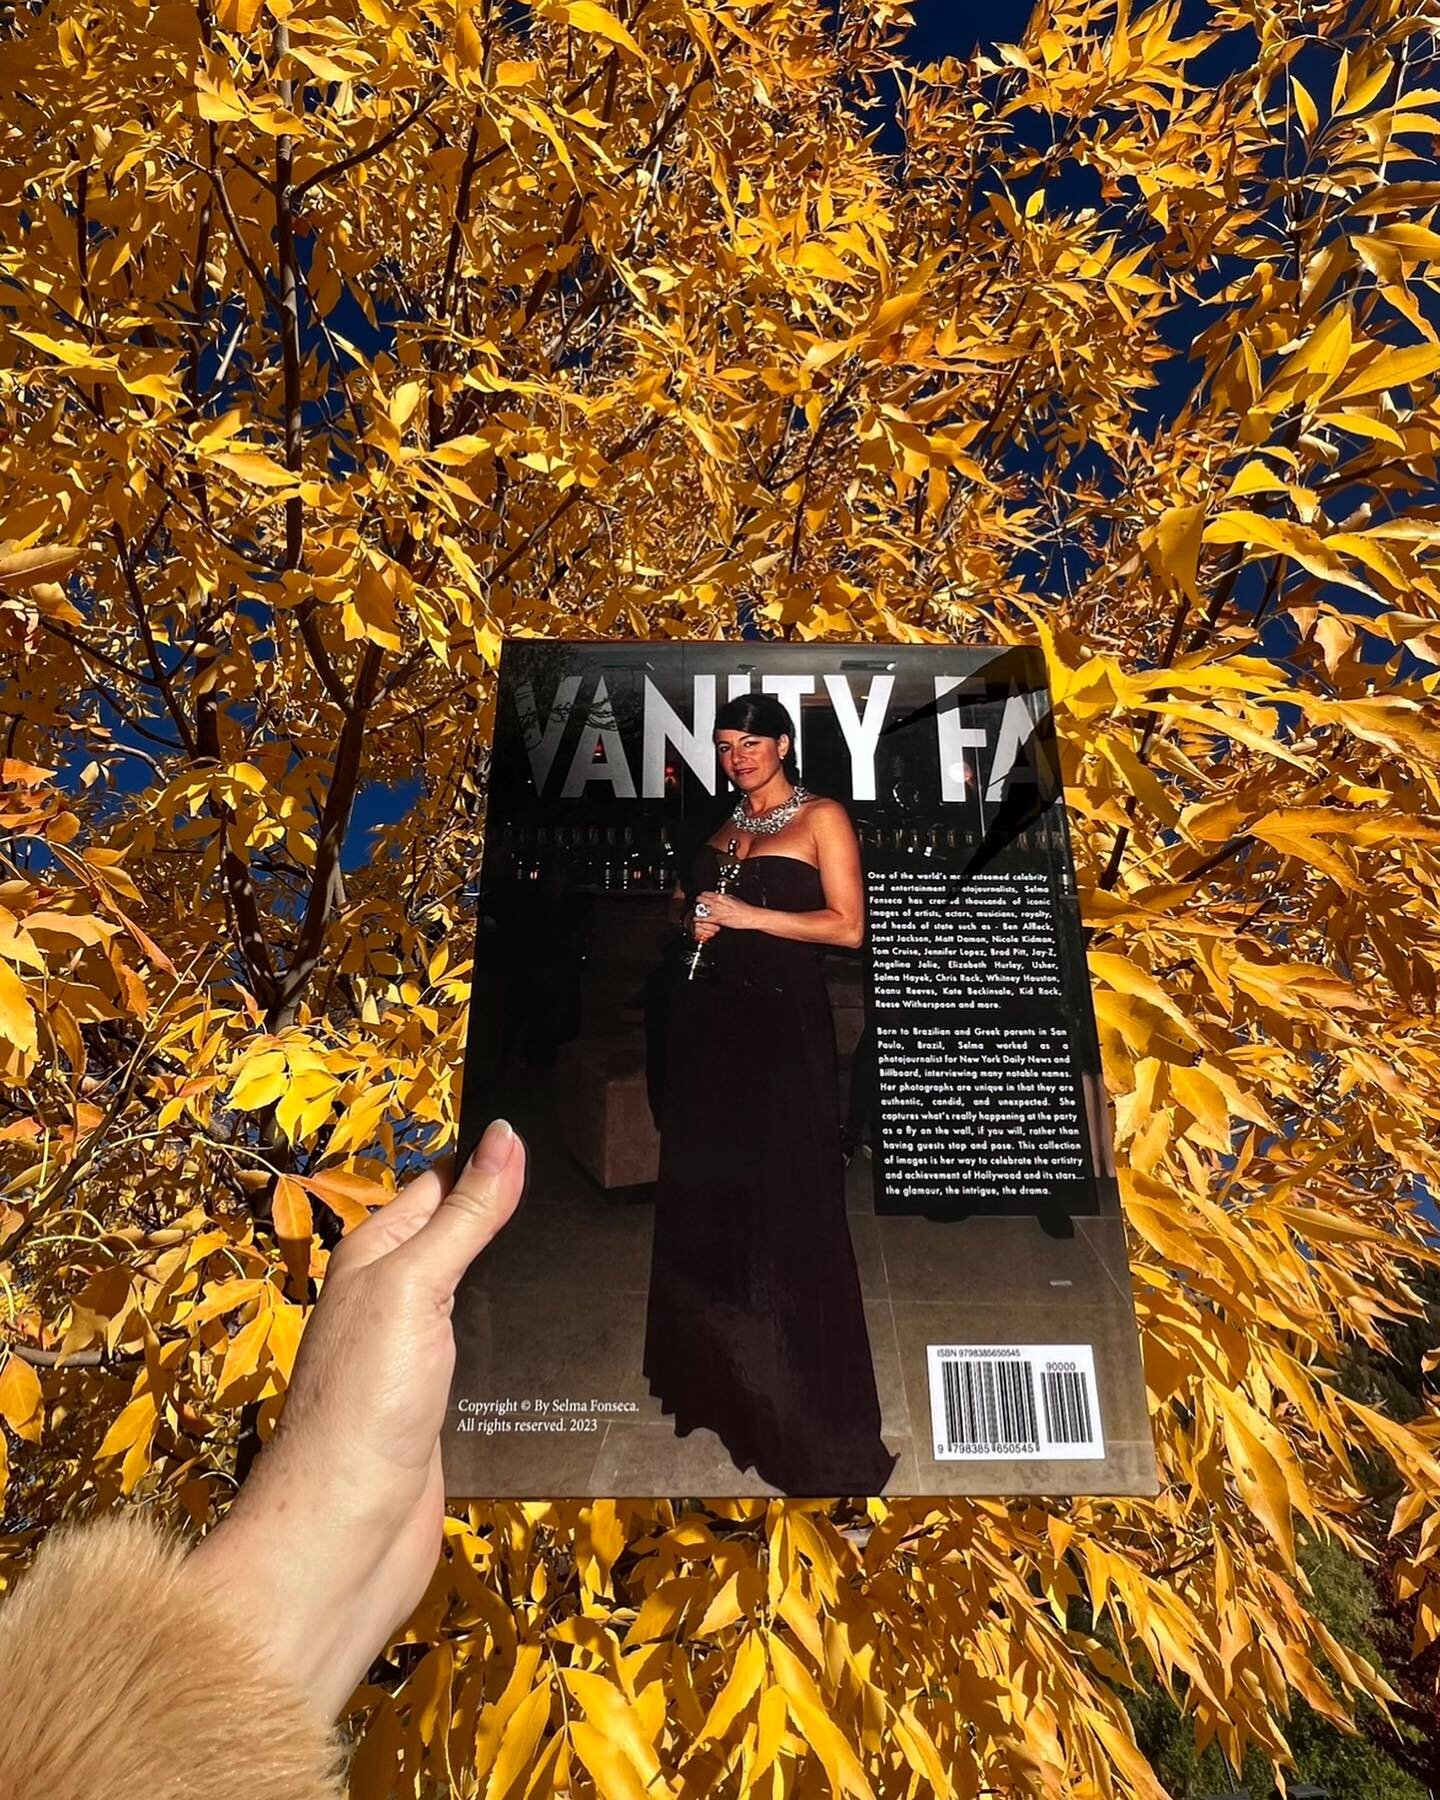 PartyingWithSelma: Inside Hollywood&rsquo;s Brightest Night Book enjoy the Autumn Colors. #PartyingWithSelma #NoOneStopsSelma #celebritybook #book #photobook #celebrity